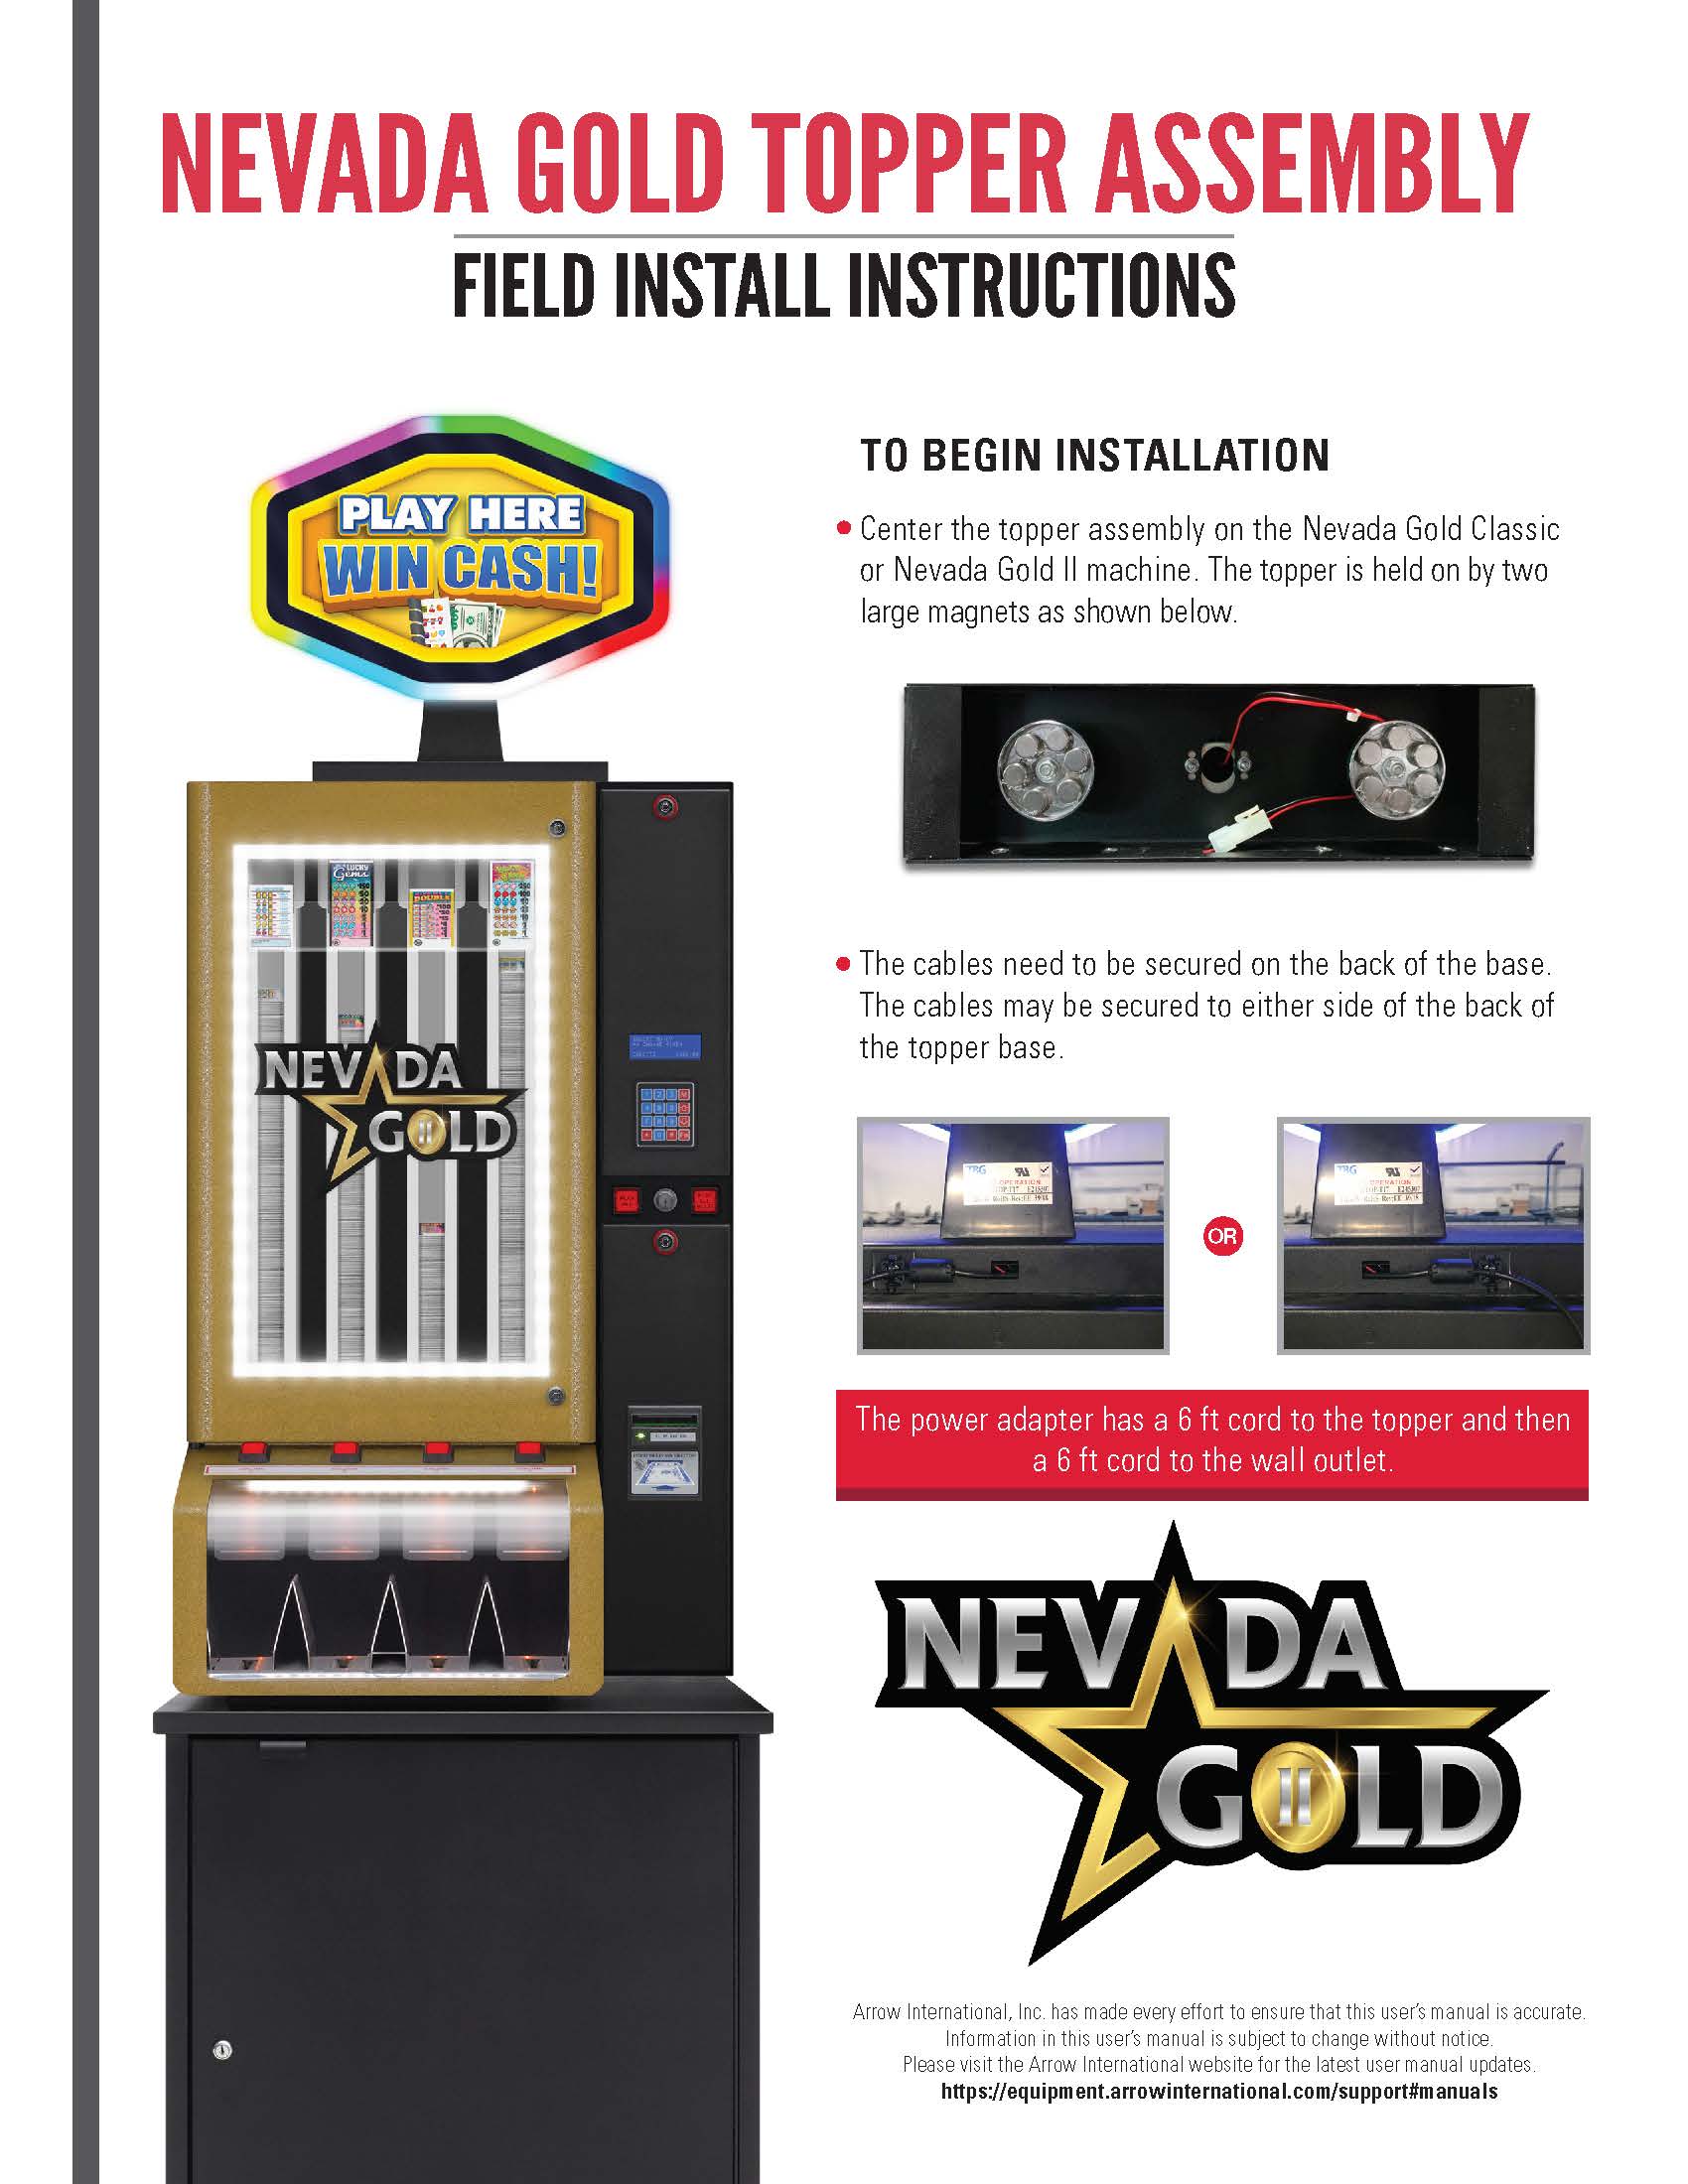 Nevada Gold Topper Assembly